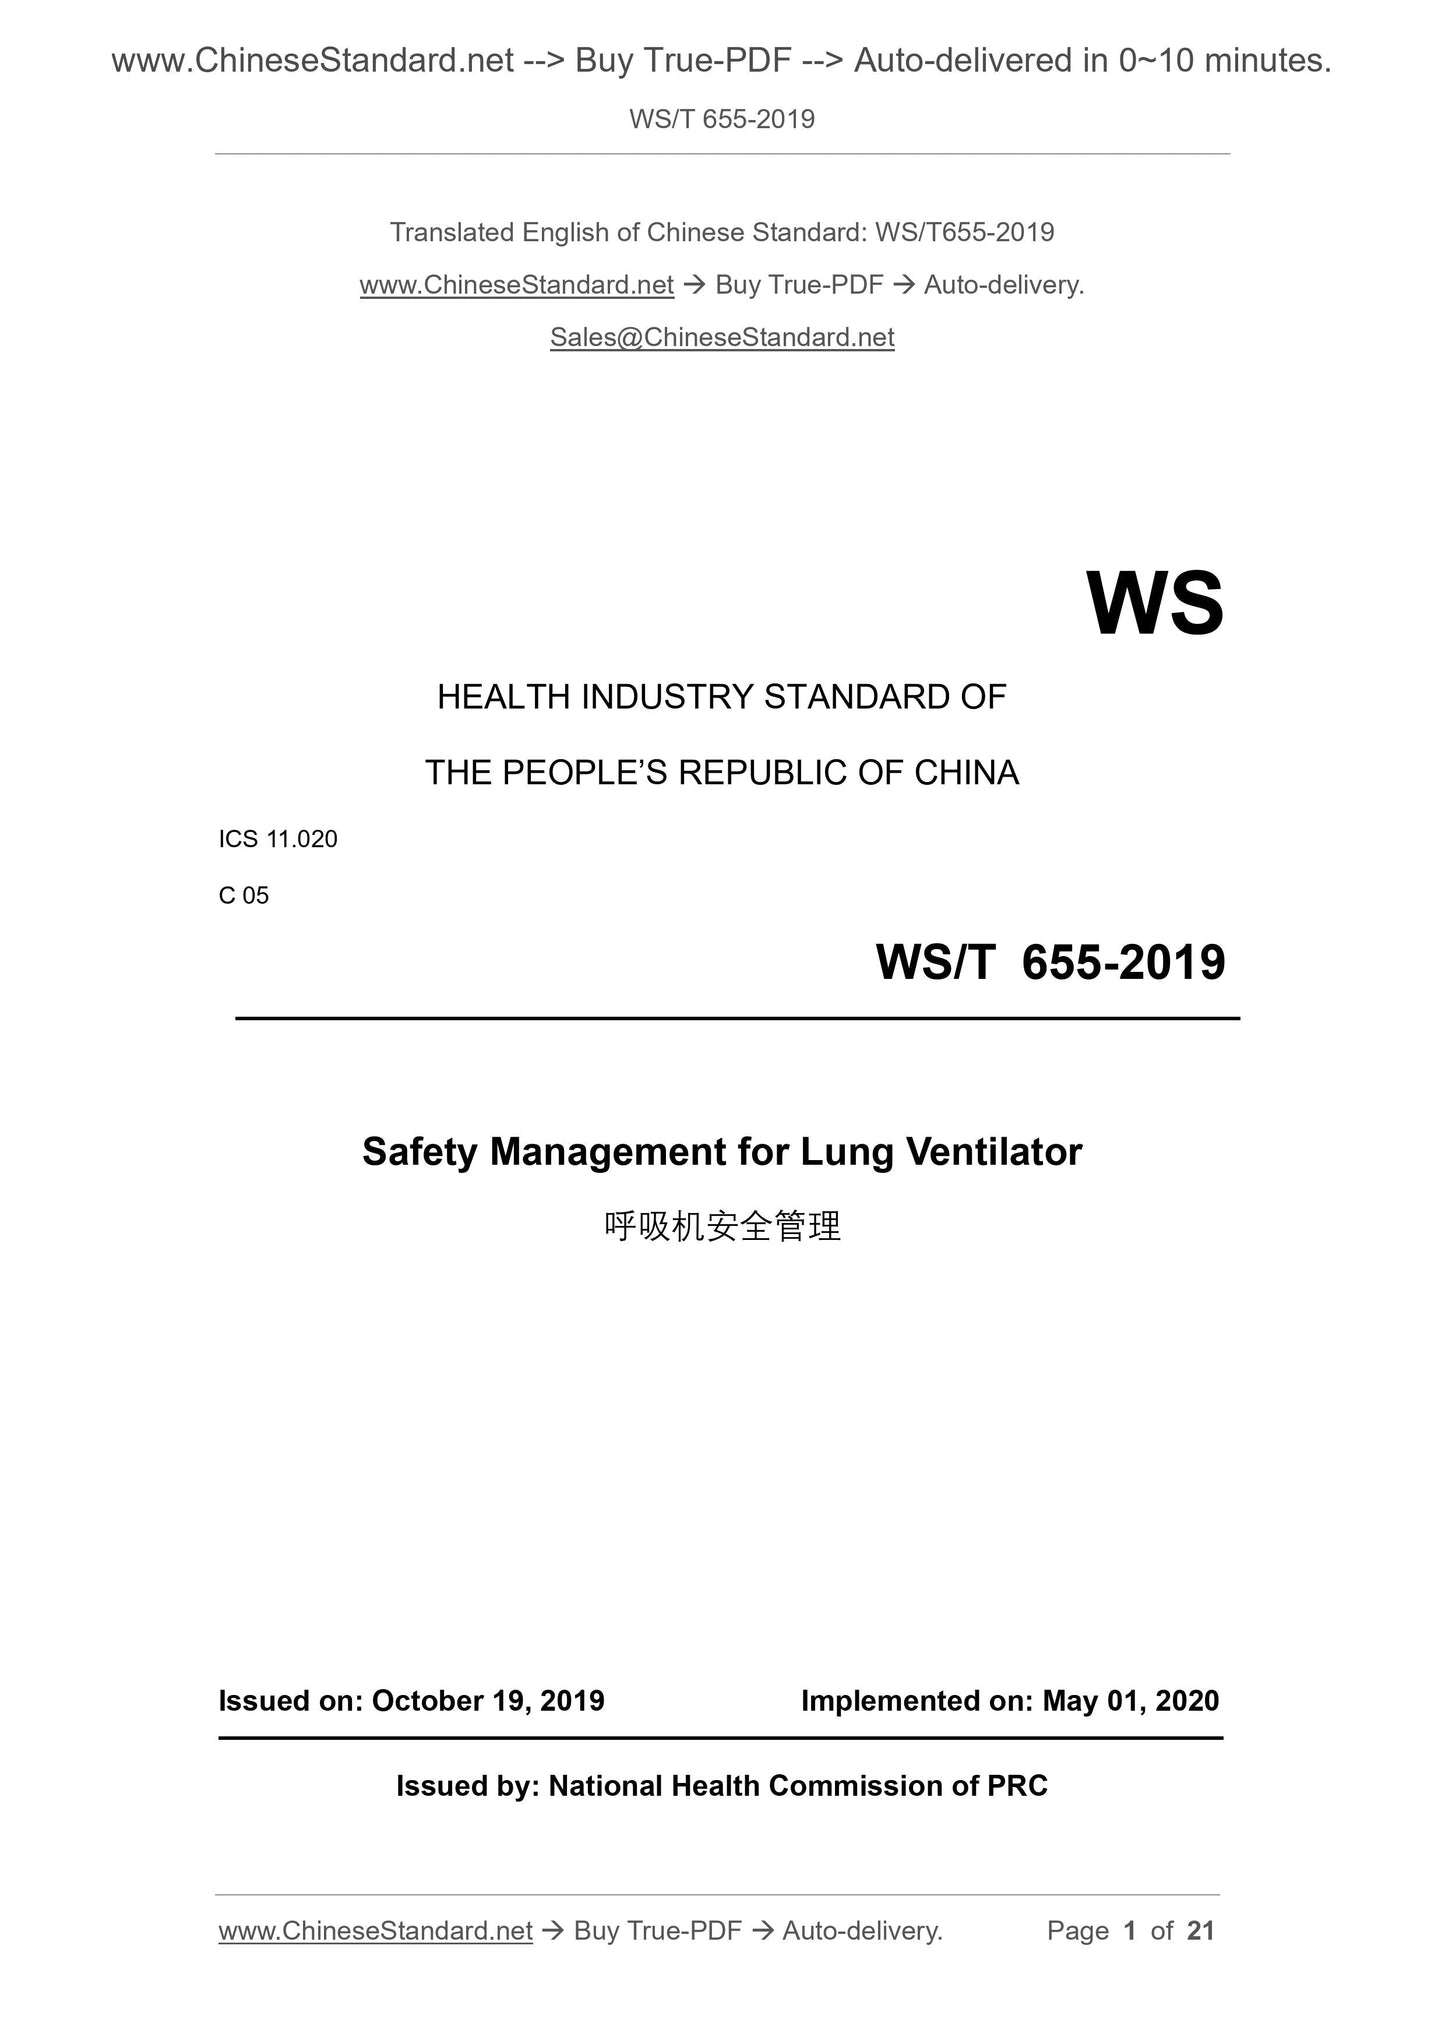 WS/T 655-2019 Page 1